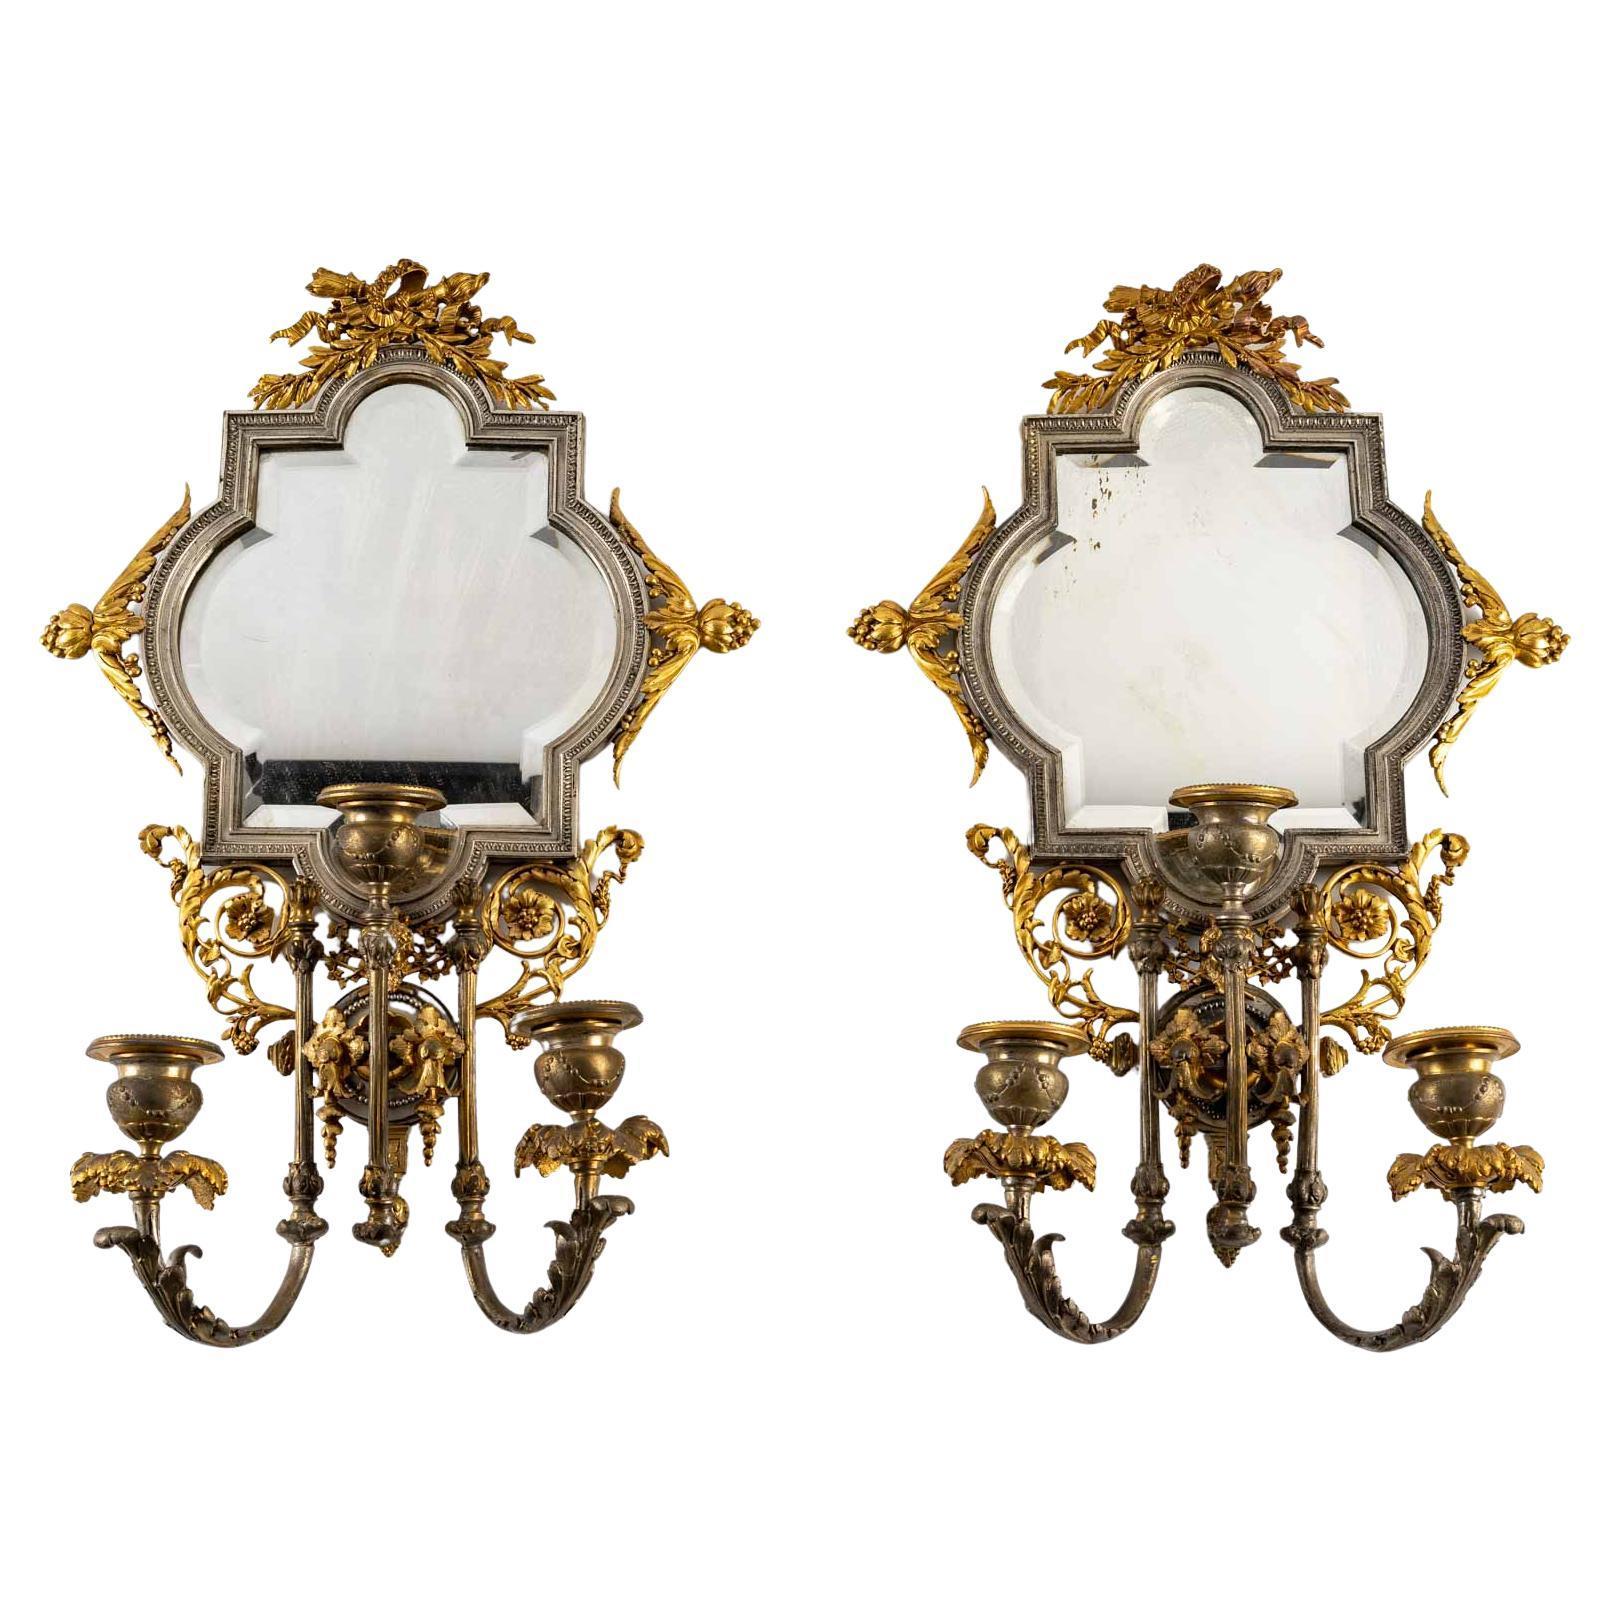 A pair of gilt and silvered bronze sconces, 19th century.
A pair of gilt and silver plated bronze sconces, bevelled mirror, Napoleon III period, 19th century.
Measures: H: 45 cm, W: 30 cm, D: 12 cm.
 